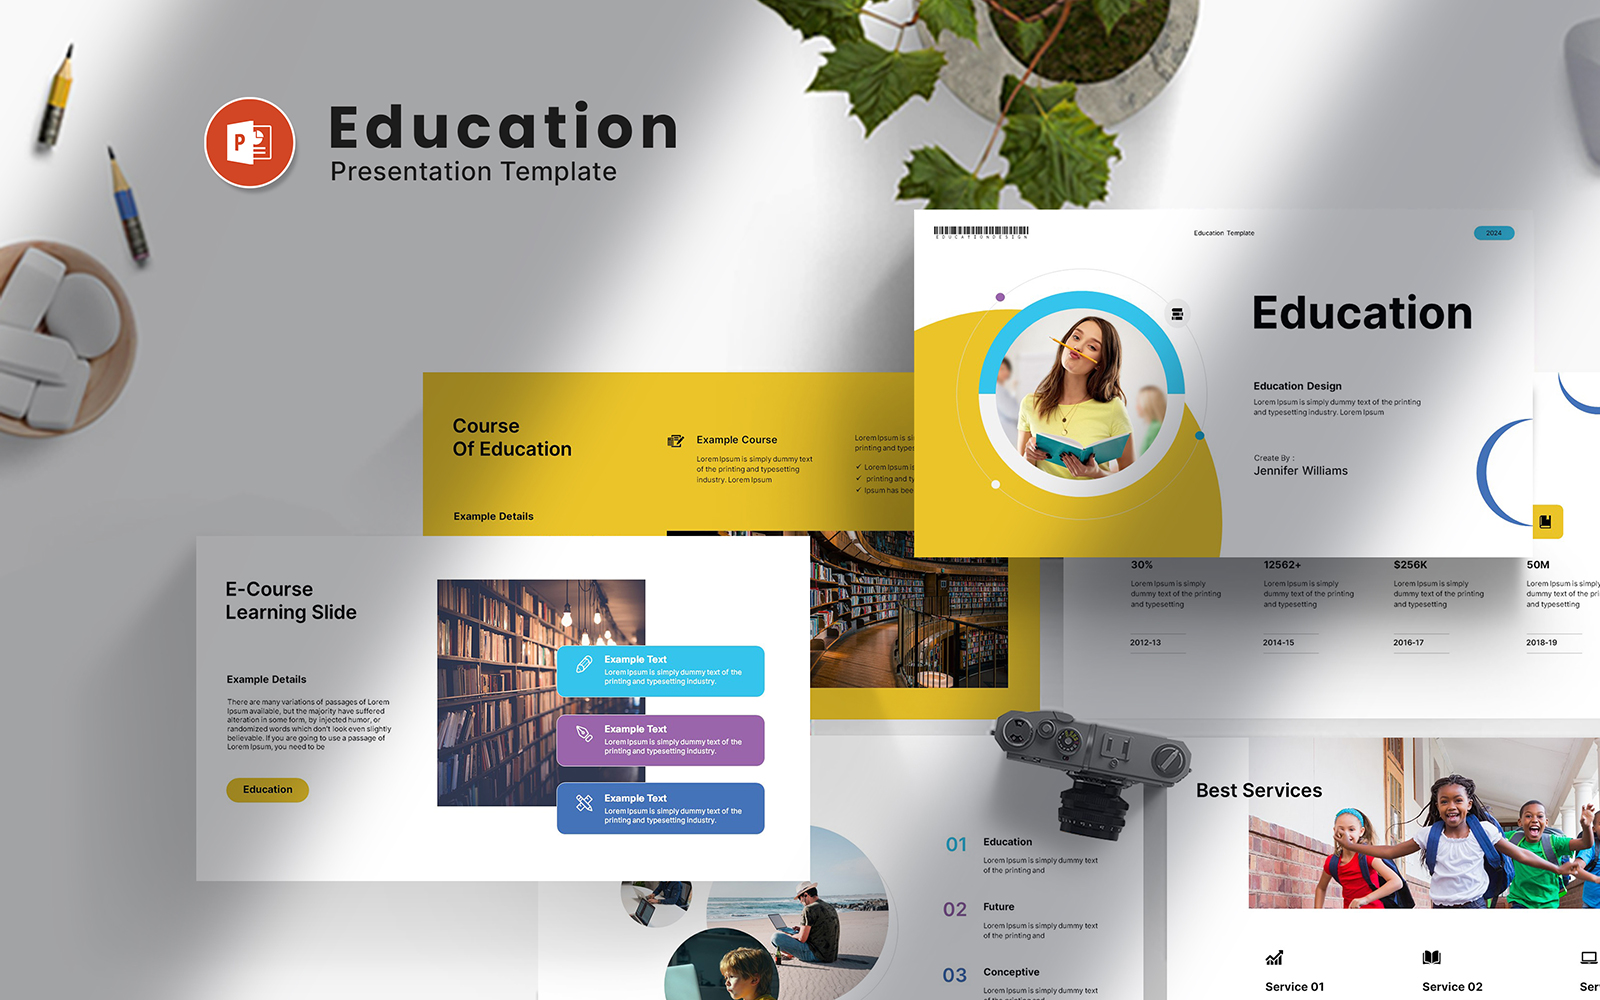 The Education PowerPoint Presentation Template